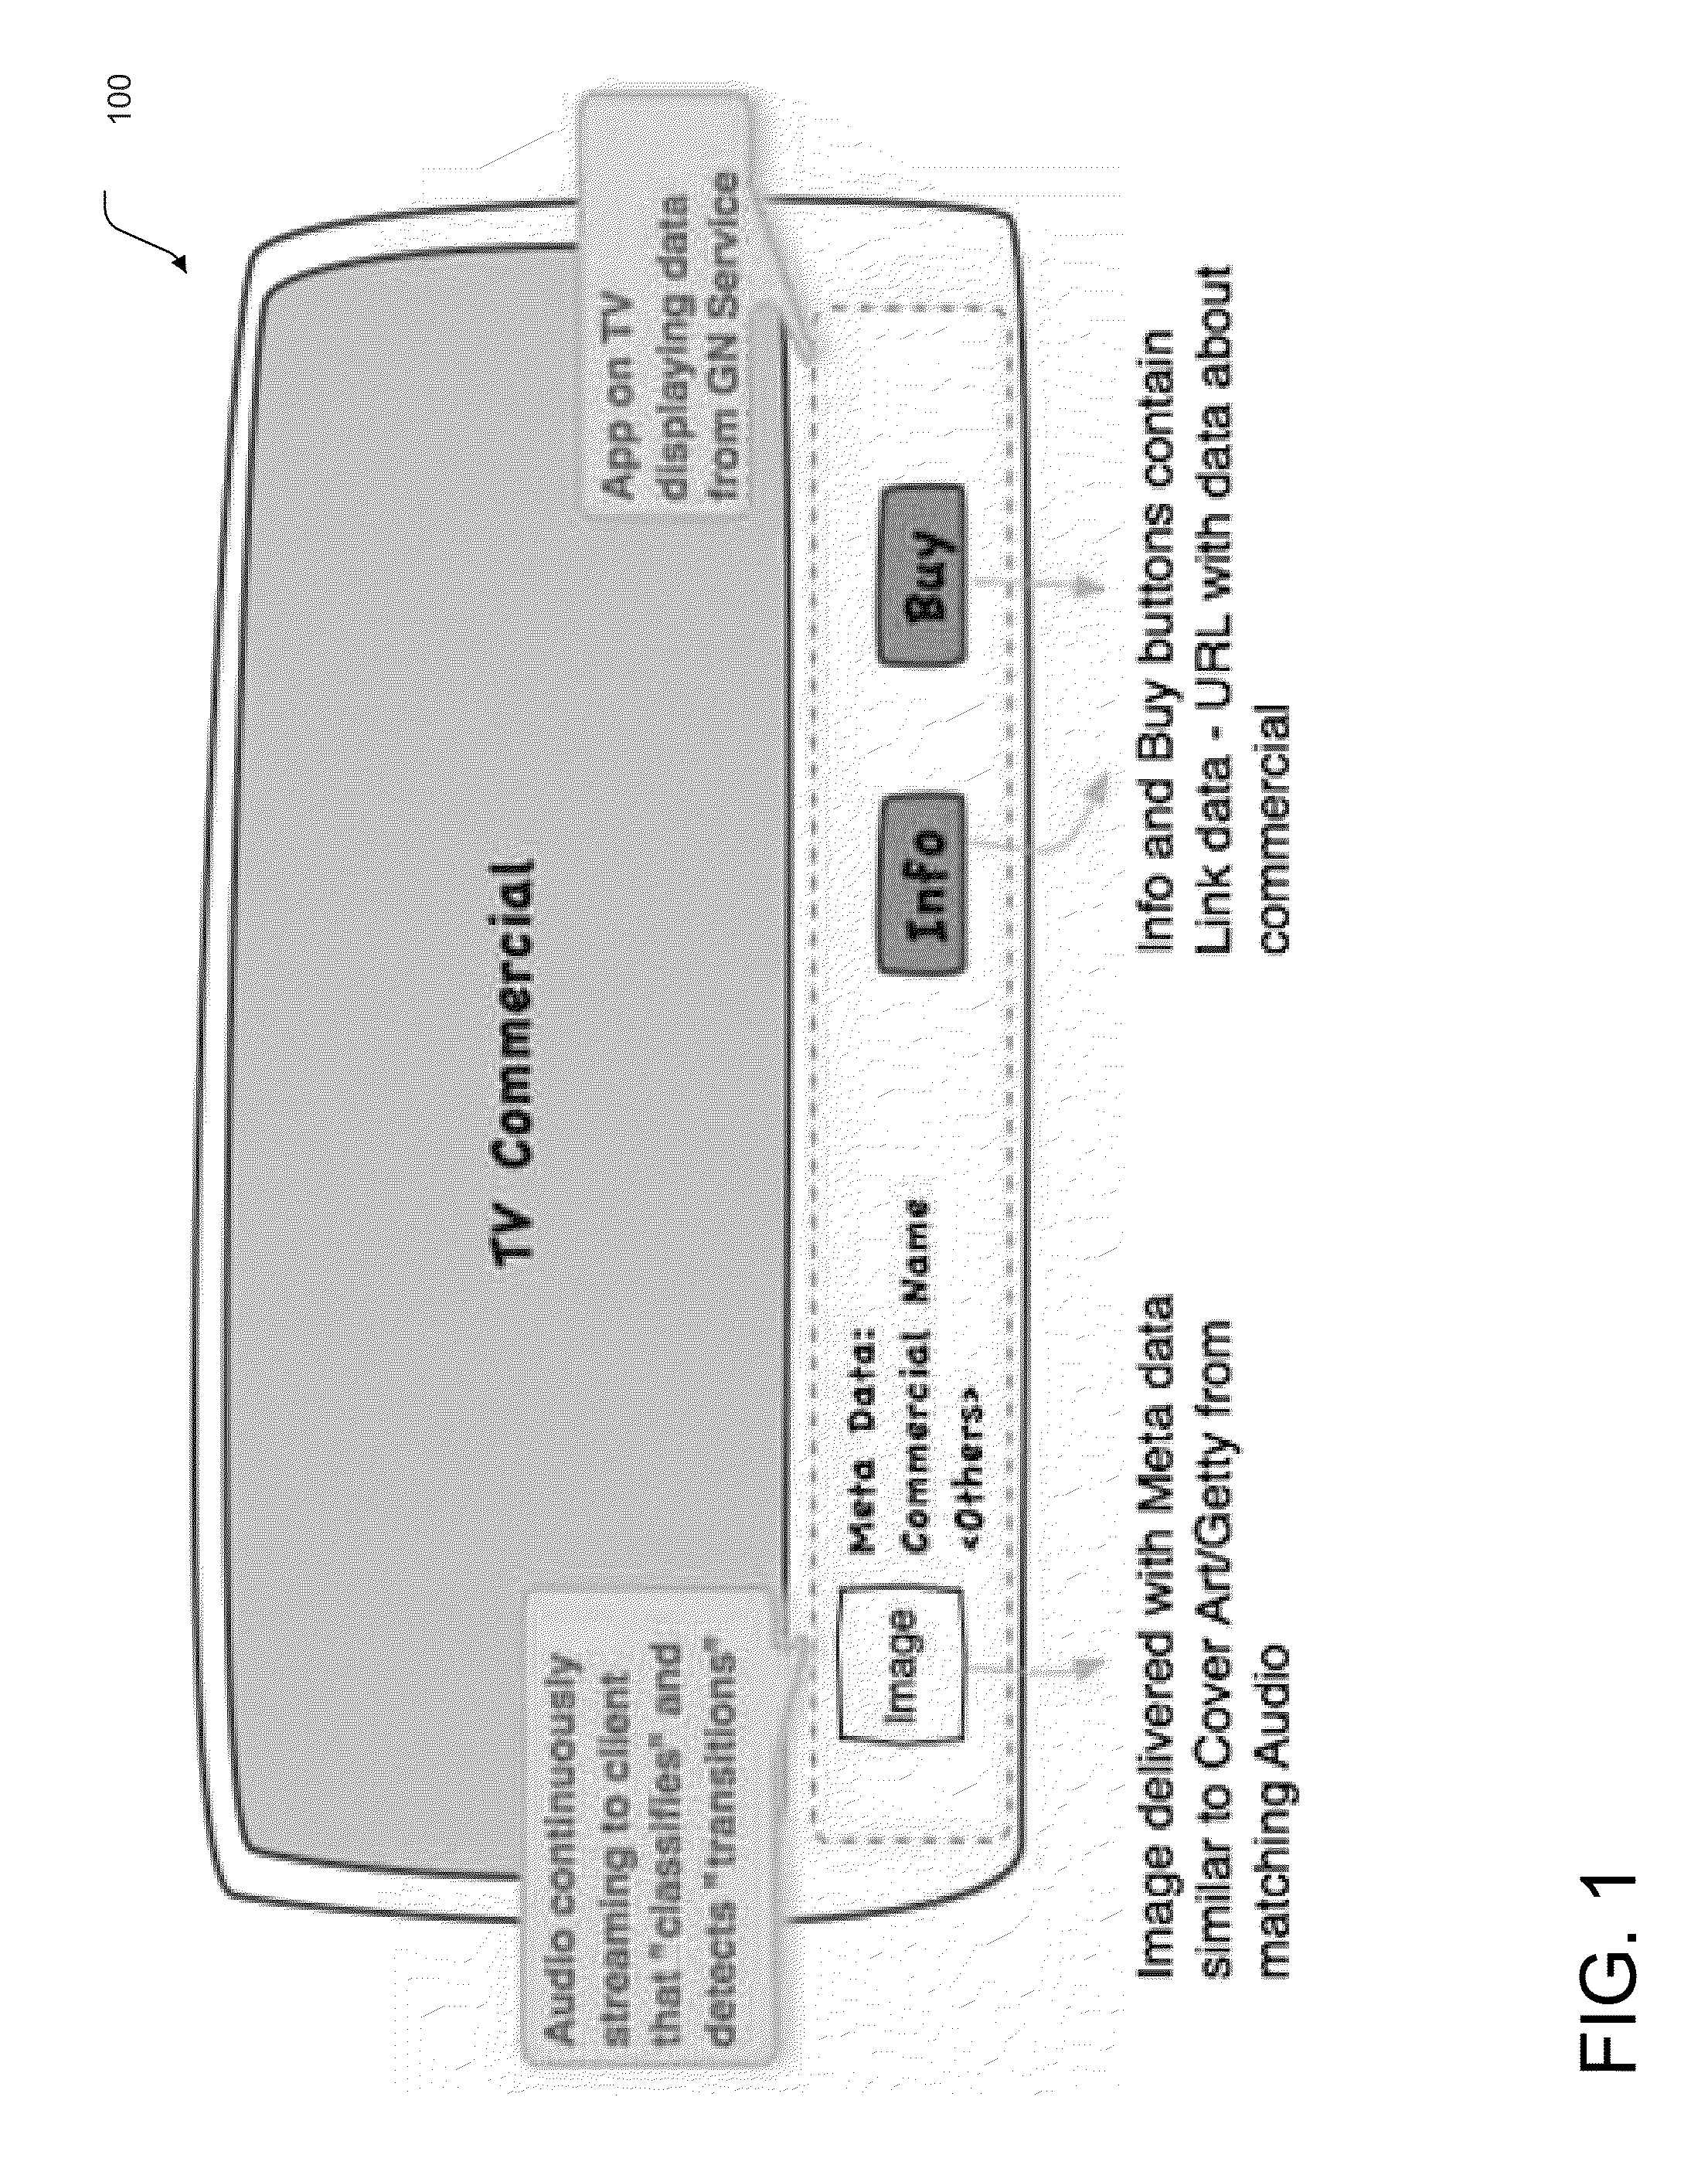 Interactive streaming content apparatus, systems and methods